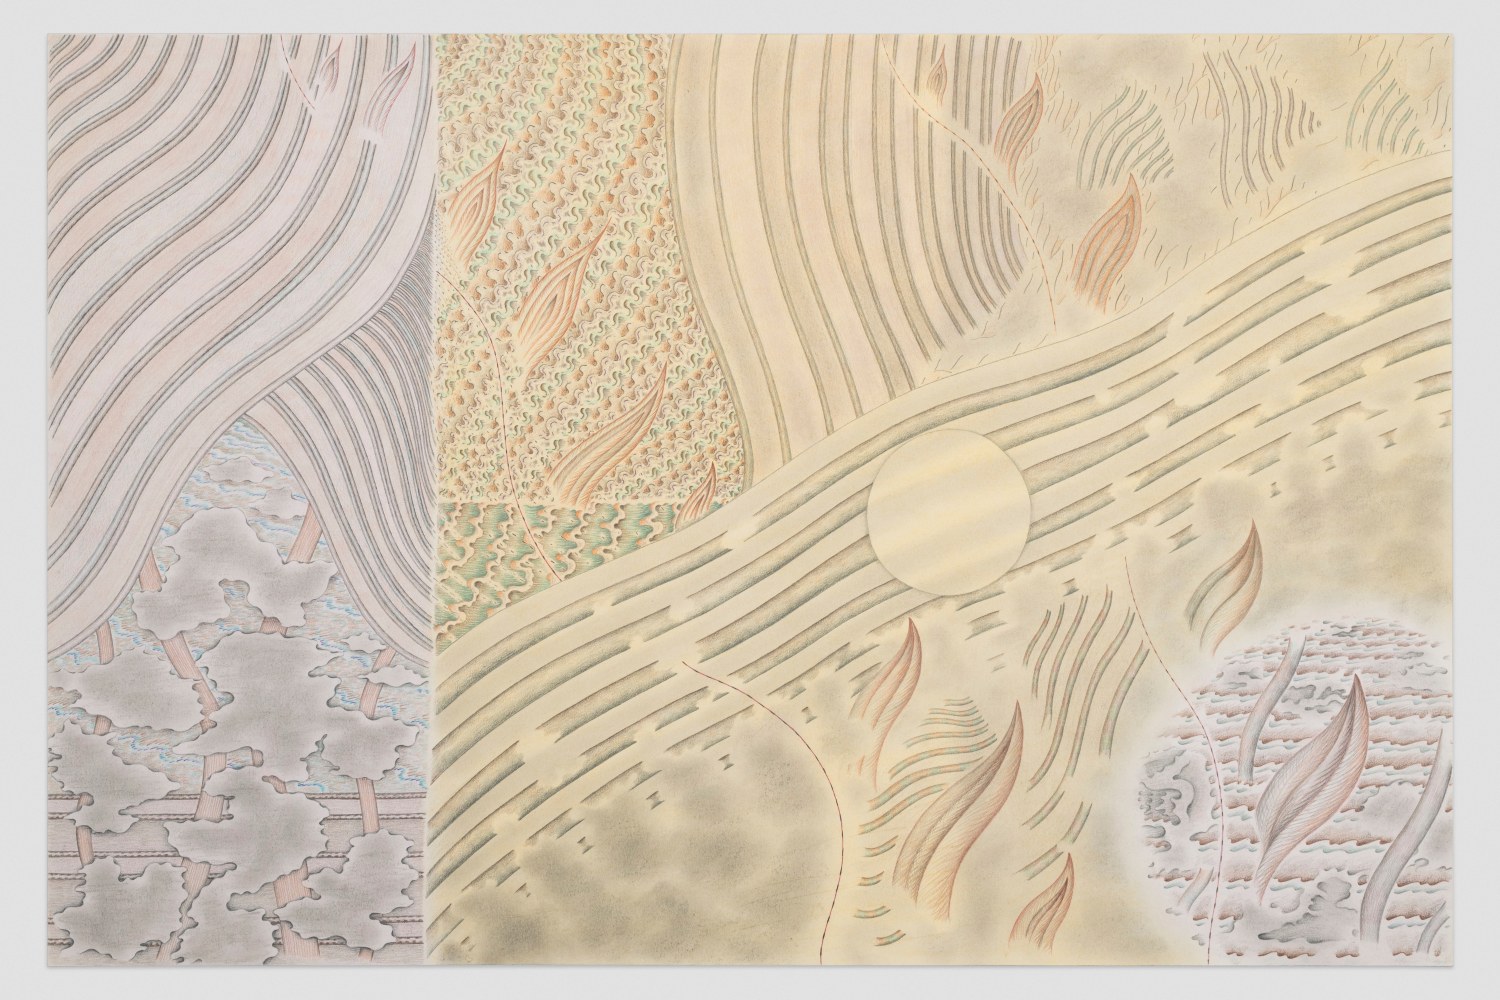 Tidal Phases,&amp;nbsp;1984
Graphite, pastel and colored pencil on paper
20 &amp;times; 30 1/8 inches
50.8 &amp;times; 76.5 centimeters&amp;nbsp;